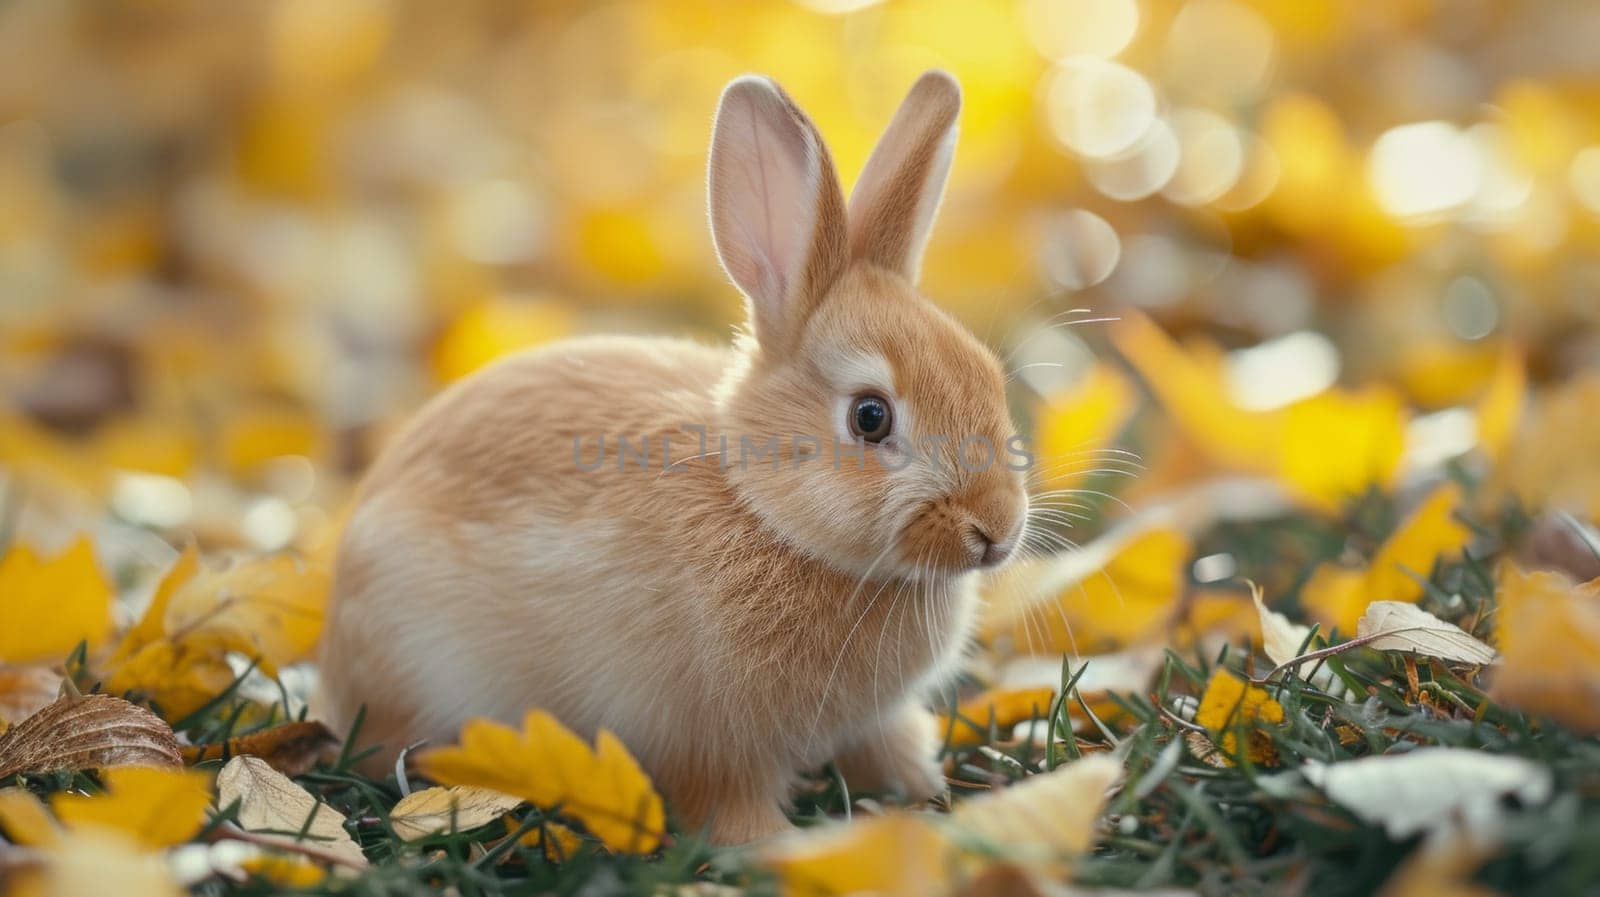 A small rabbit sitting in a field of yellow leaves, AI by starush